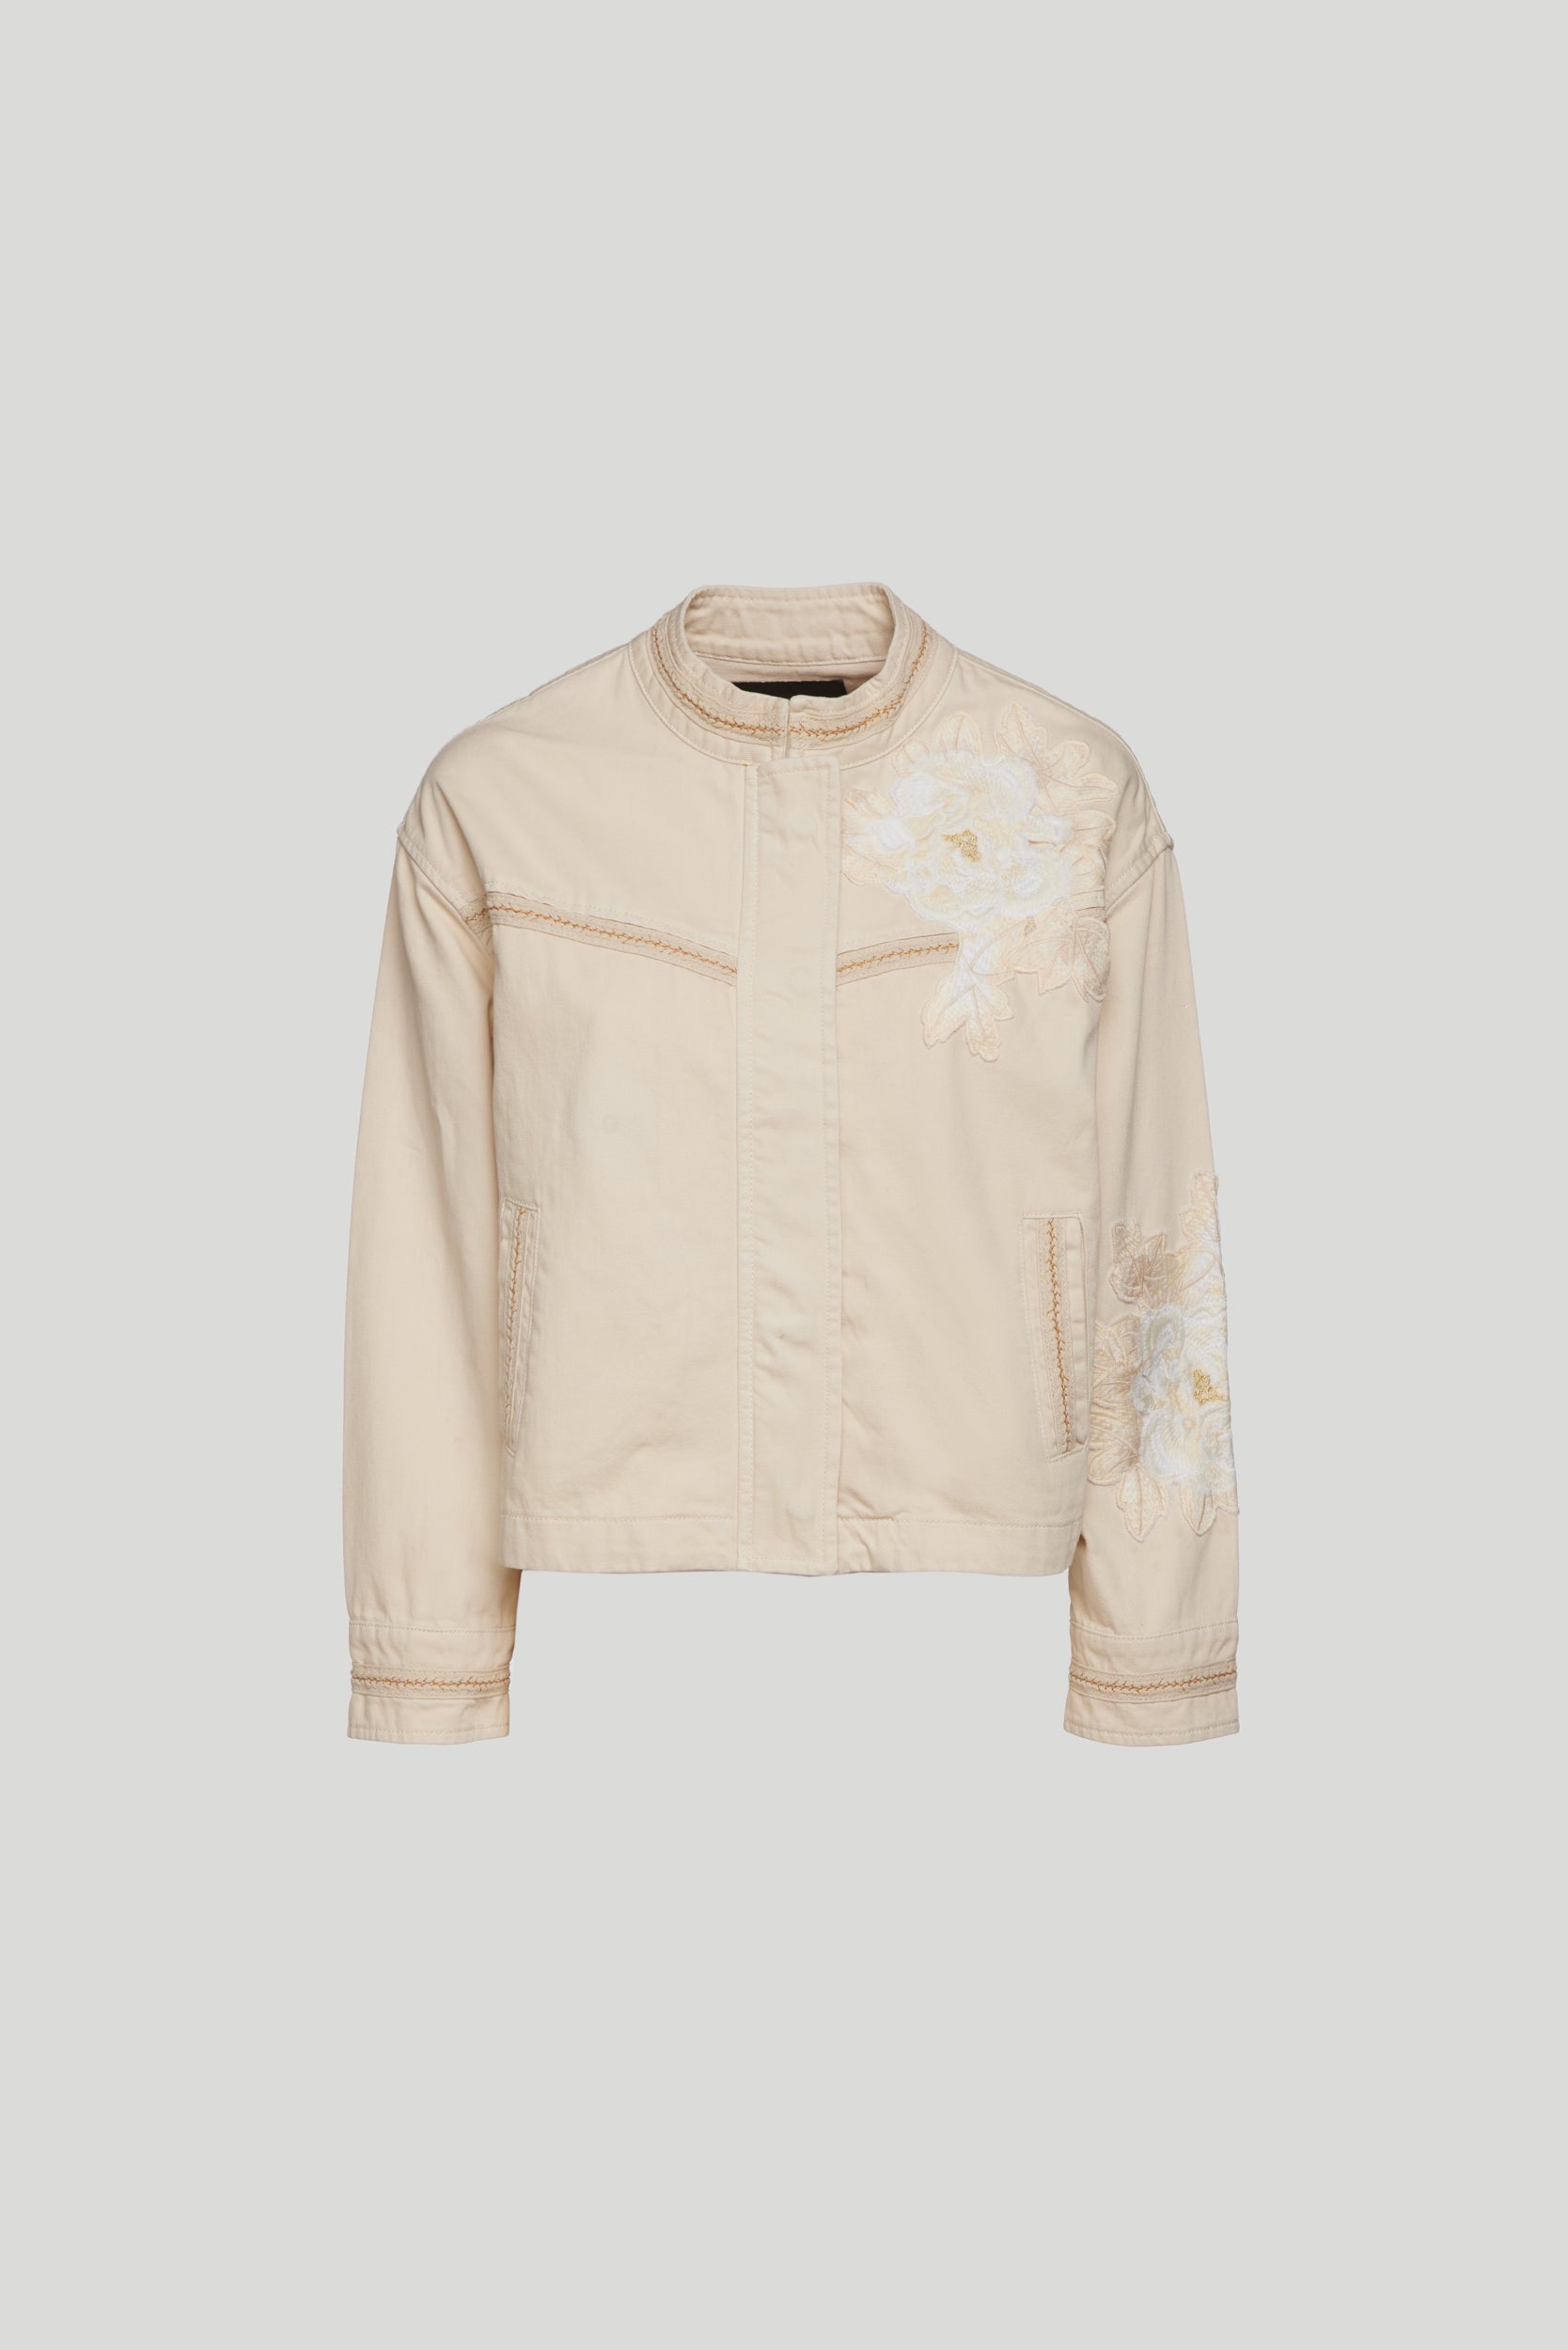 TWINSET Embroidered Ivory Jacket